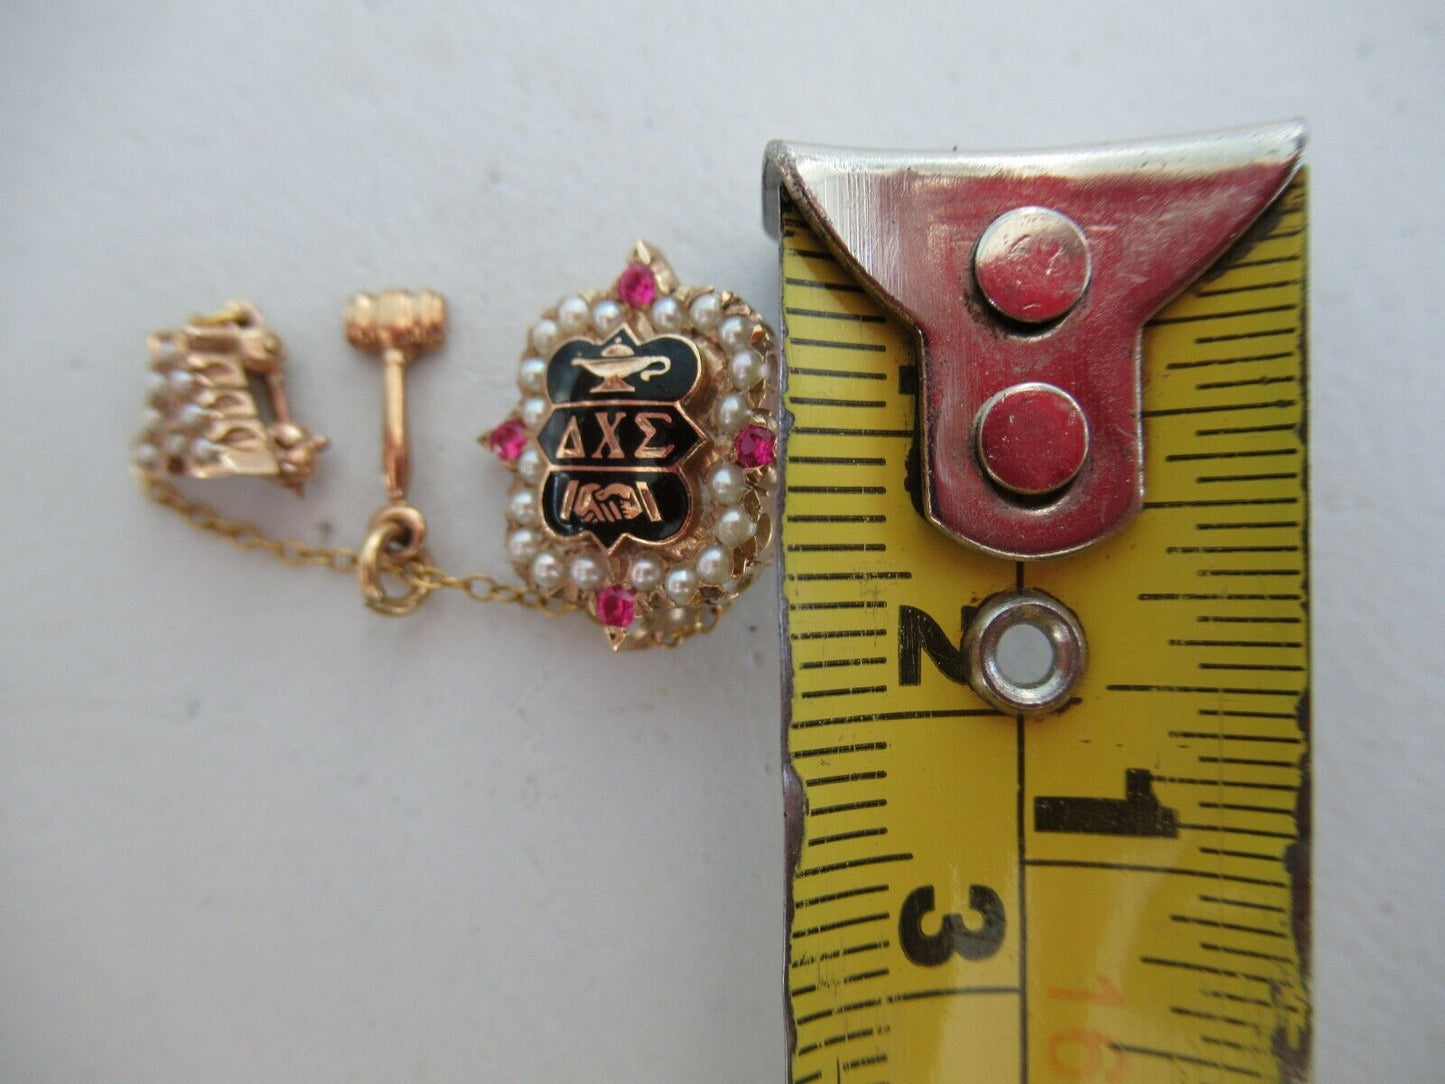 USA FRATERNITY PIN DELTA CHI SIGMA. MADE IN GOLD 10K. RUBIES. MARKED.